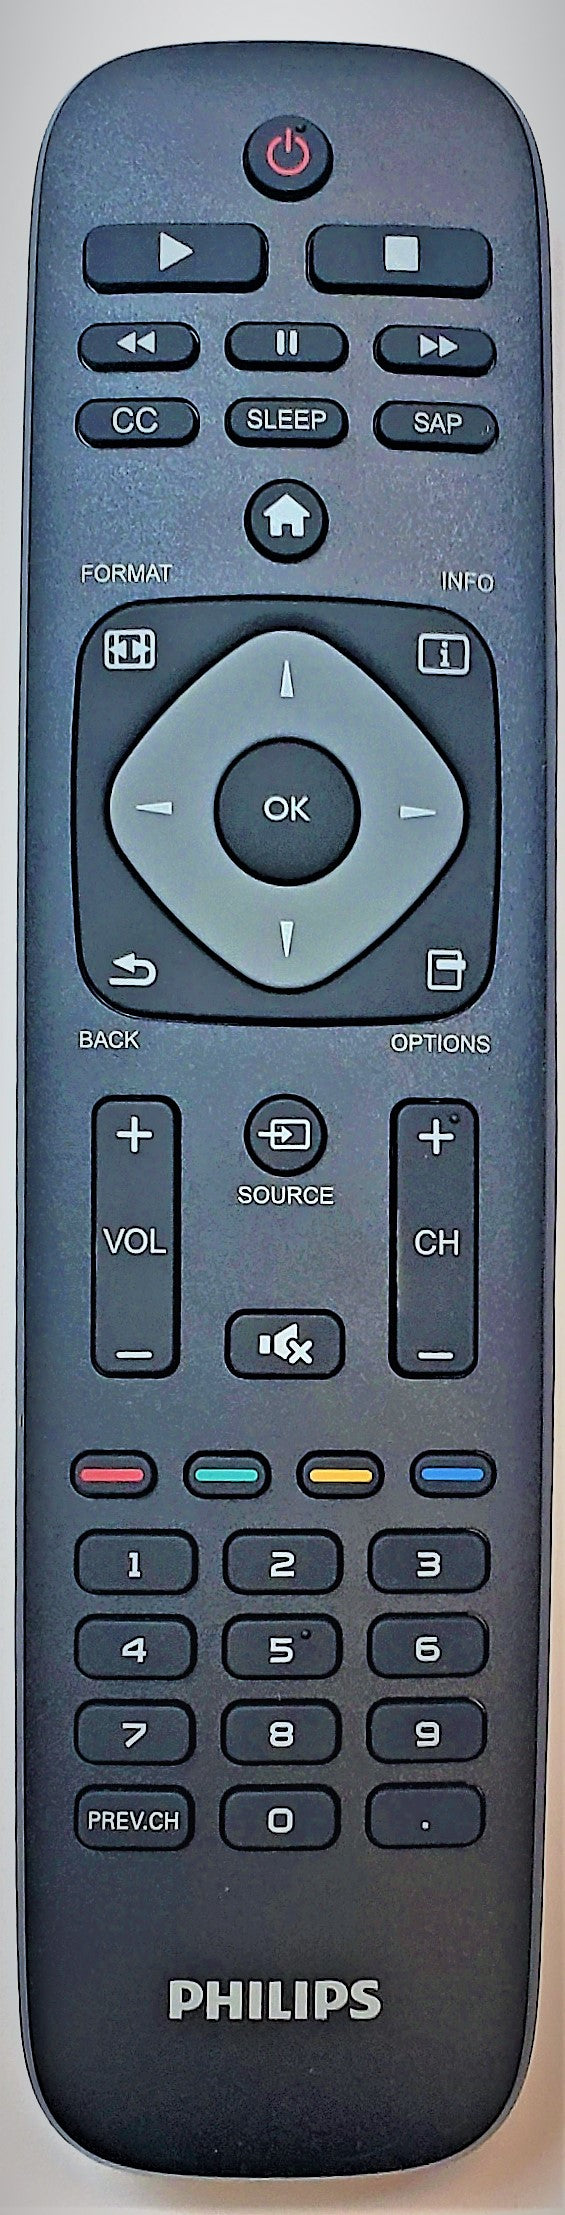 OEM replacement remote control for Philips LED/LCD TV URMT41JHG005